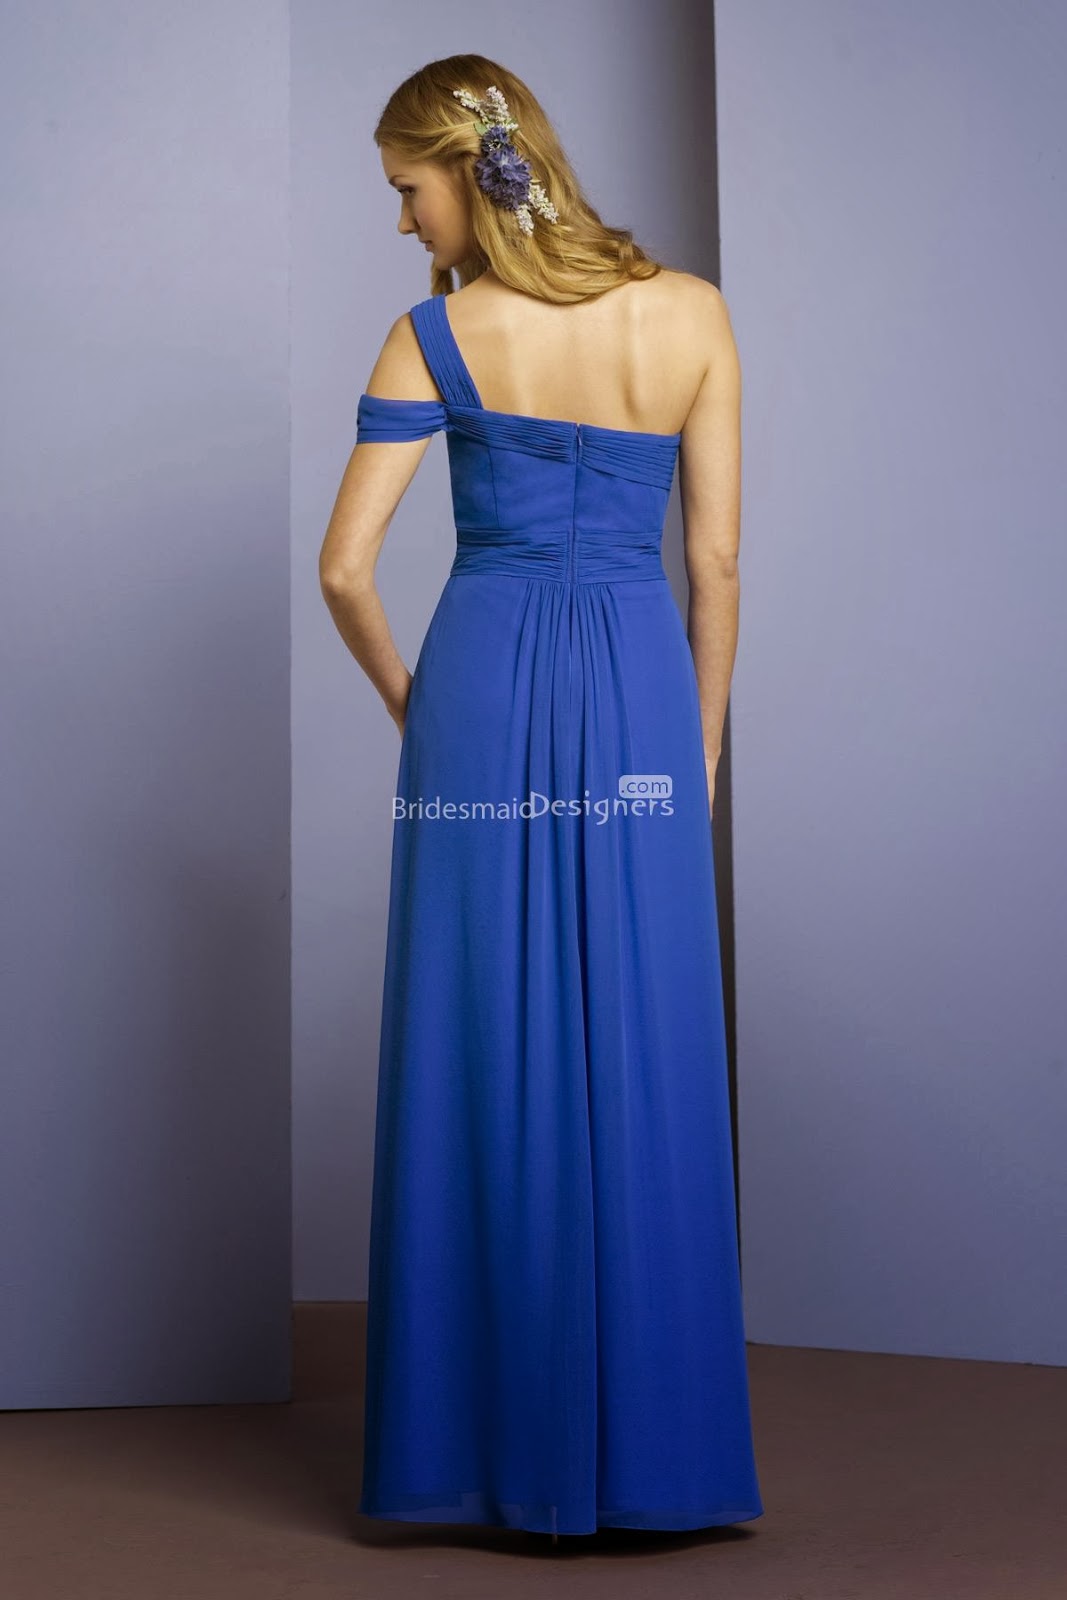 http://www.bridesmaiddesigners.com/unique-royal-blue-peek-a-boo-one-shoulder-floor-length-pleated-bridesmaid-occasion-gown-757.html